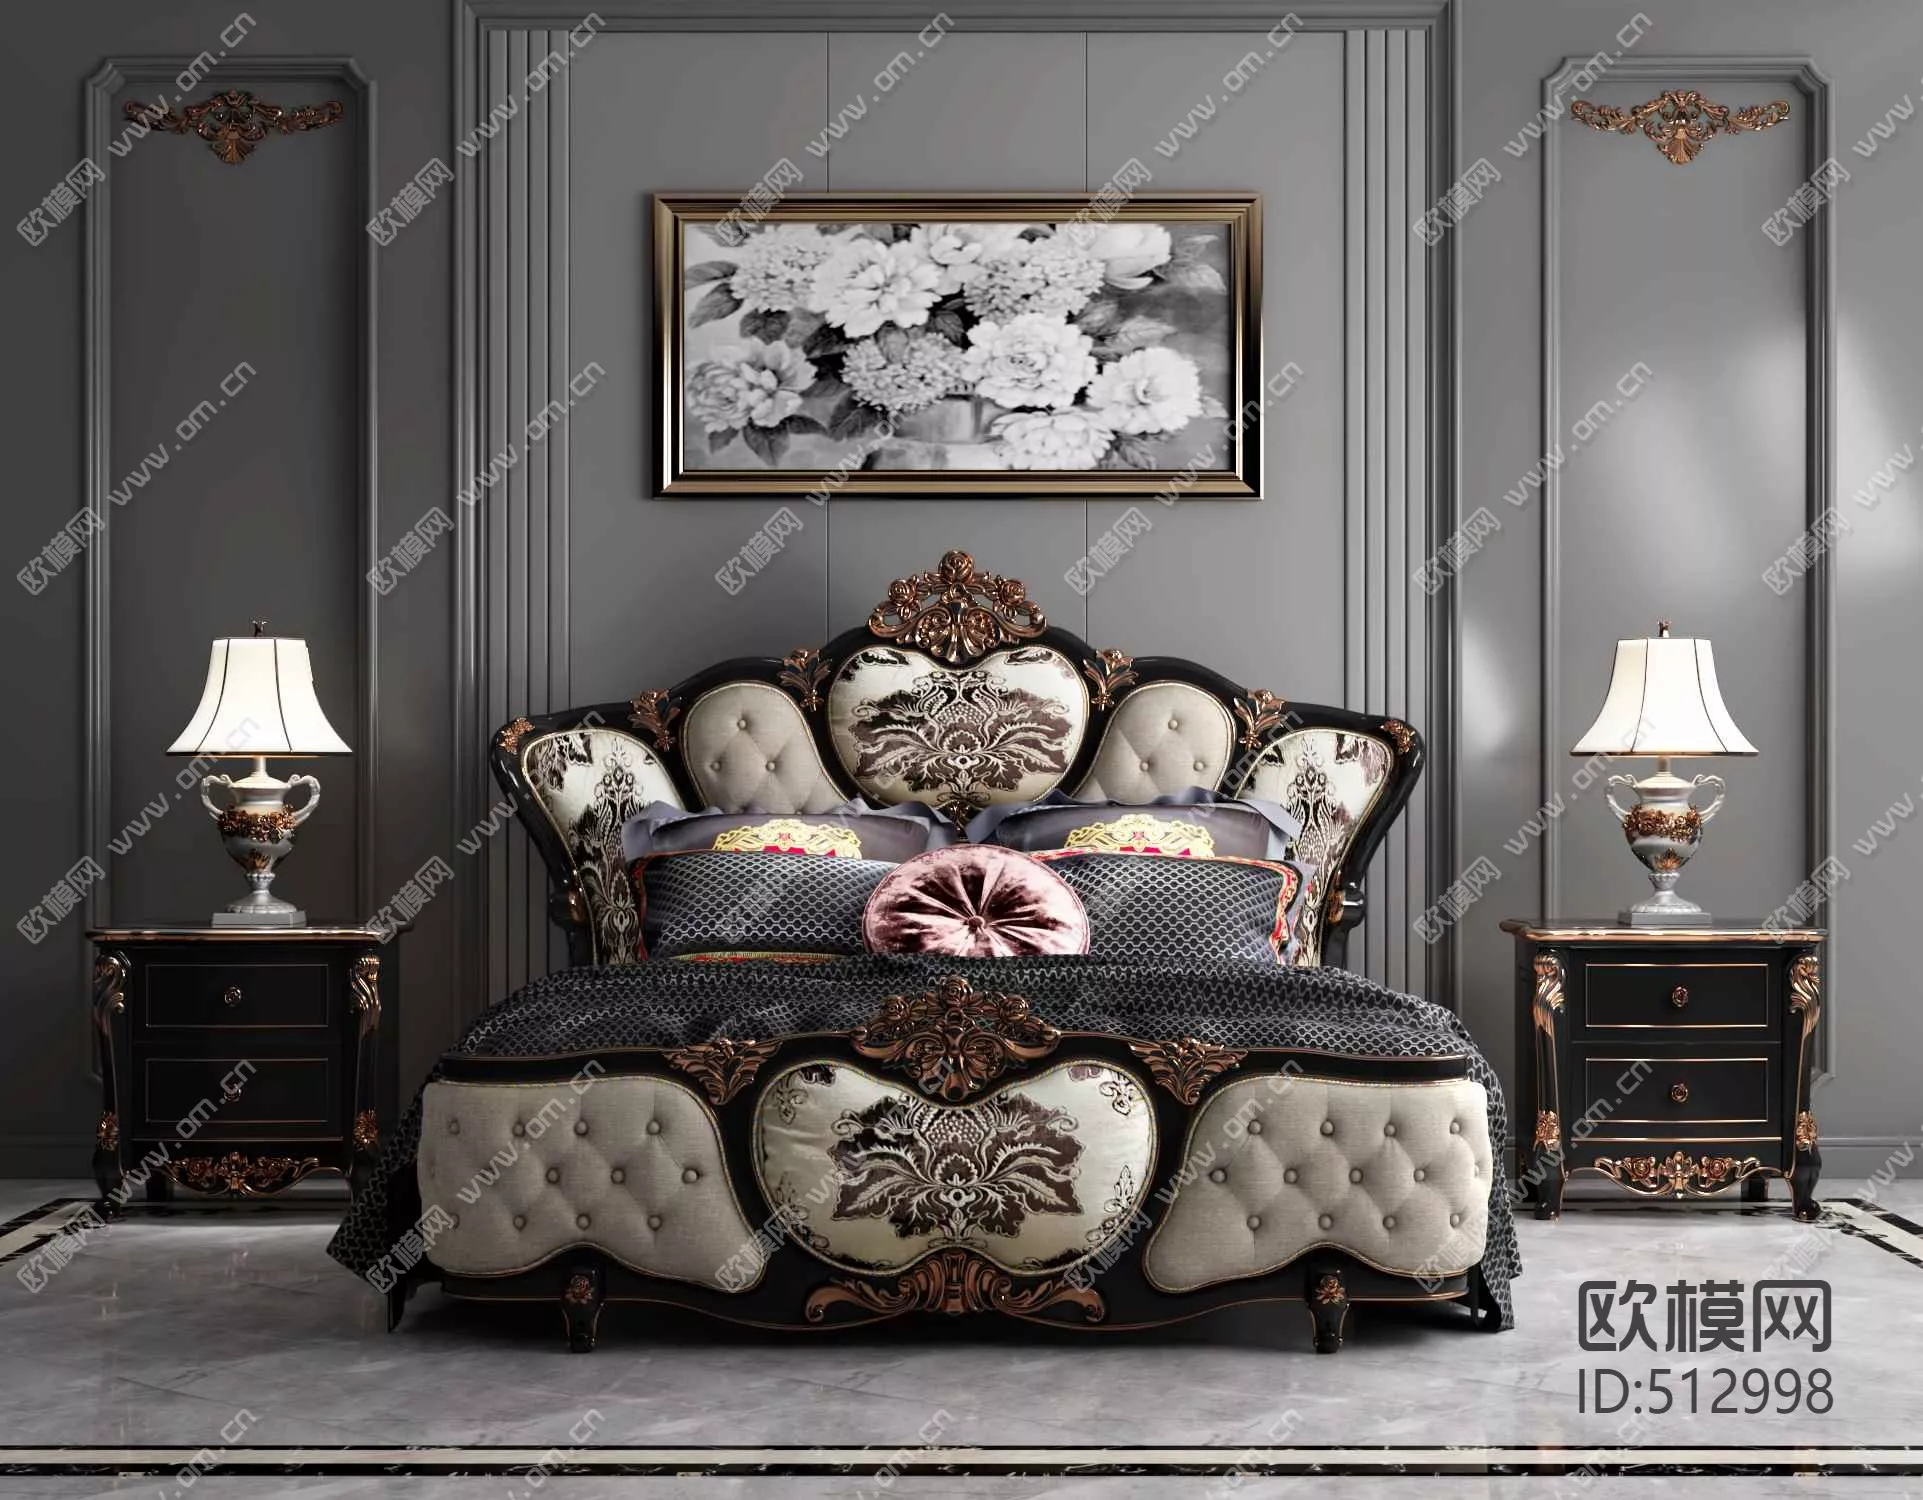 NEO CLASSIC BED - SKETCHUP 3D MODEL - VRAY OR ENSCAPE - ID16997